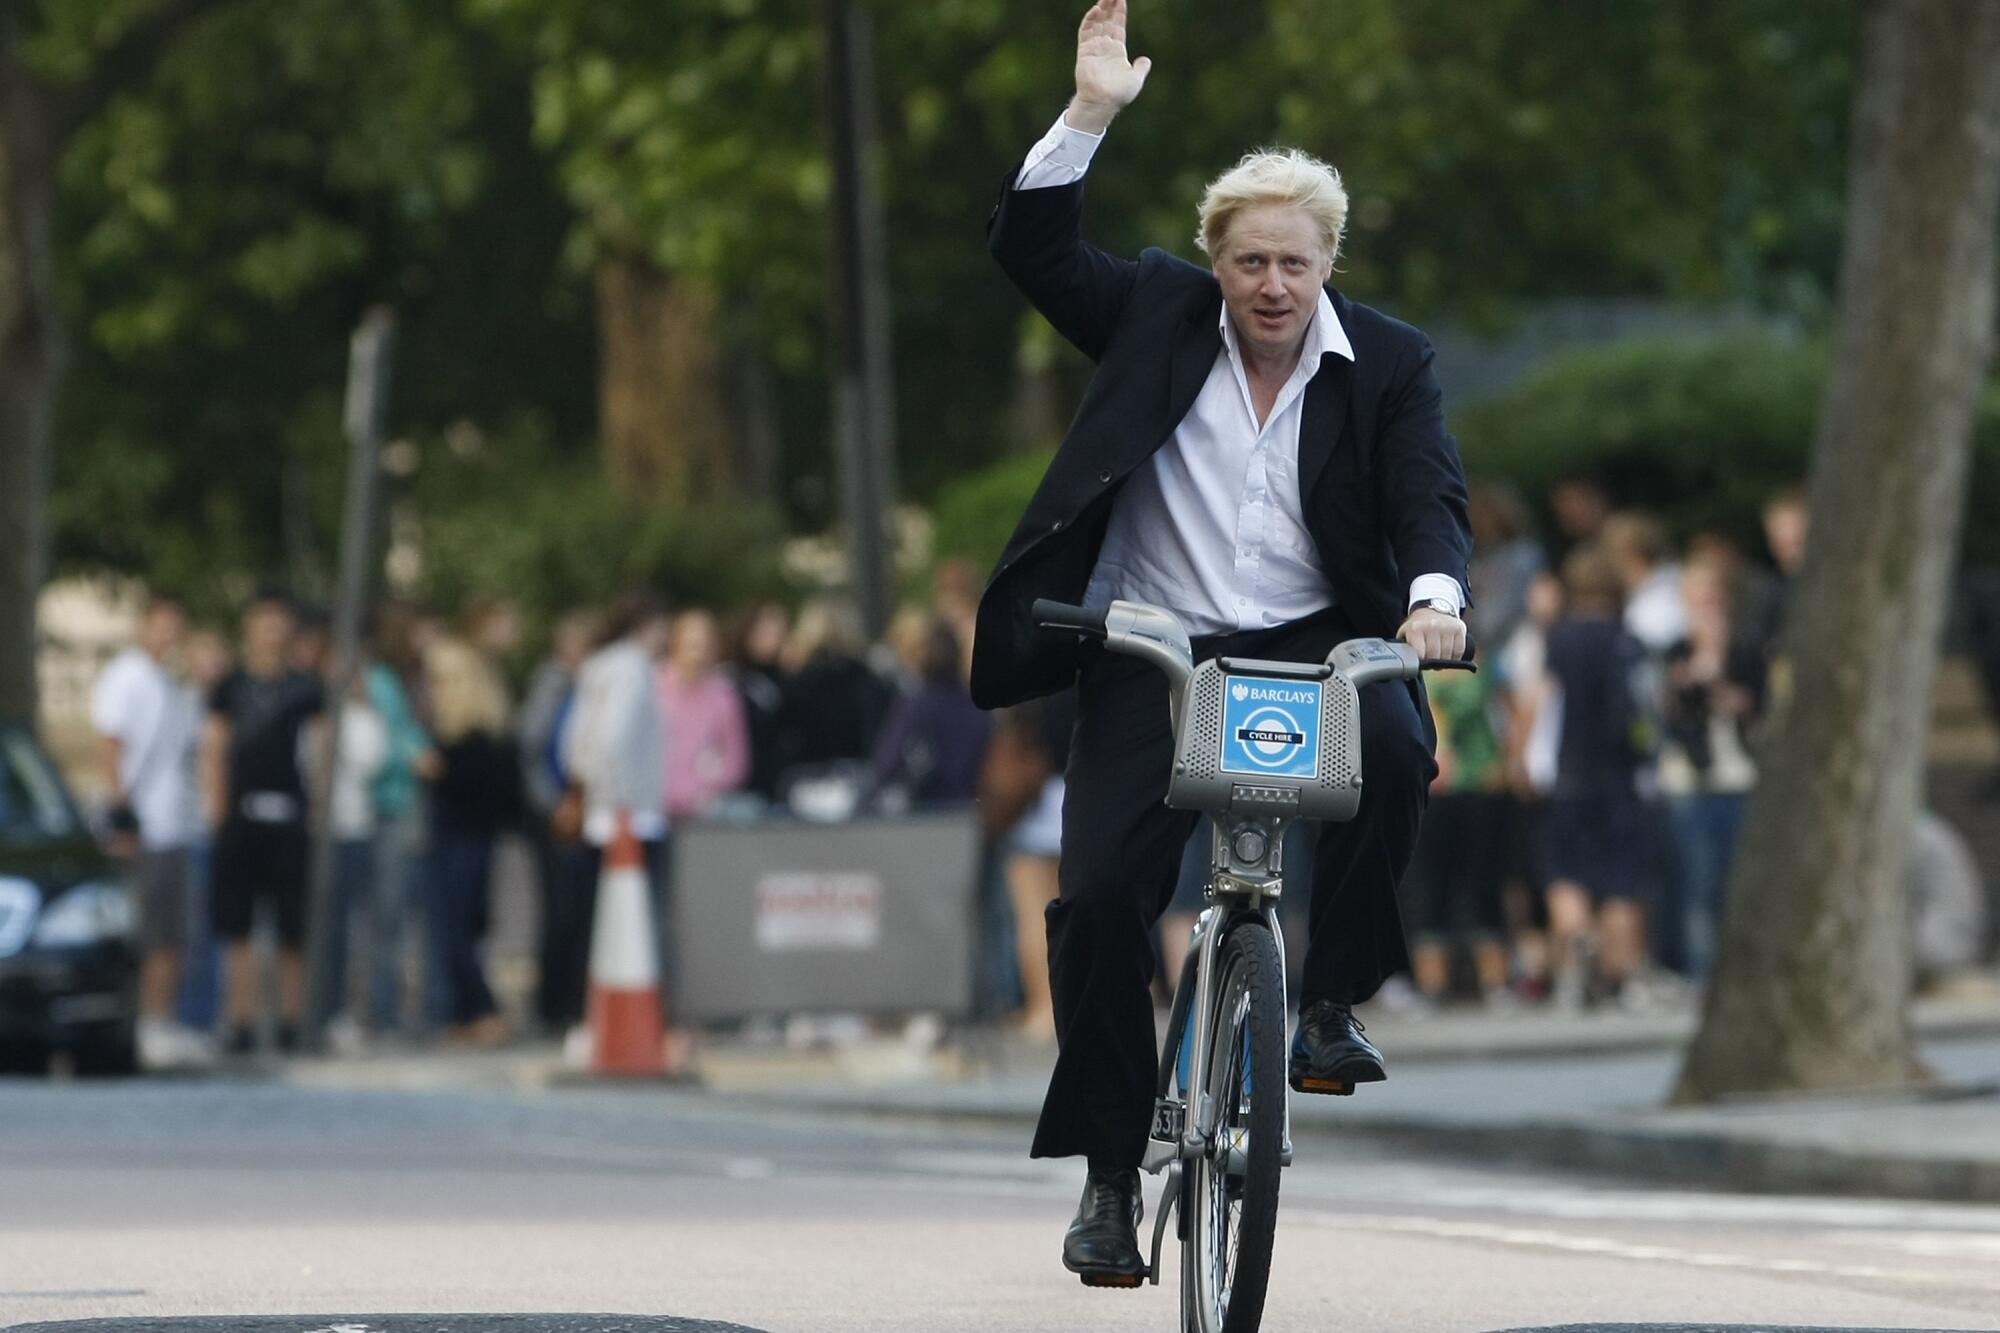 Boris Johnson, Mayor of London waves to the media as he helps launch a new cycle hire scheme in London.